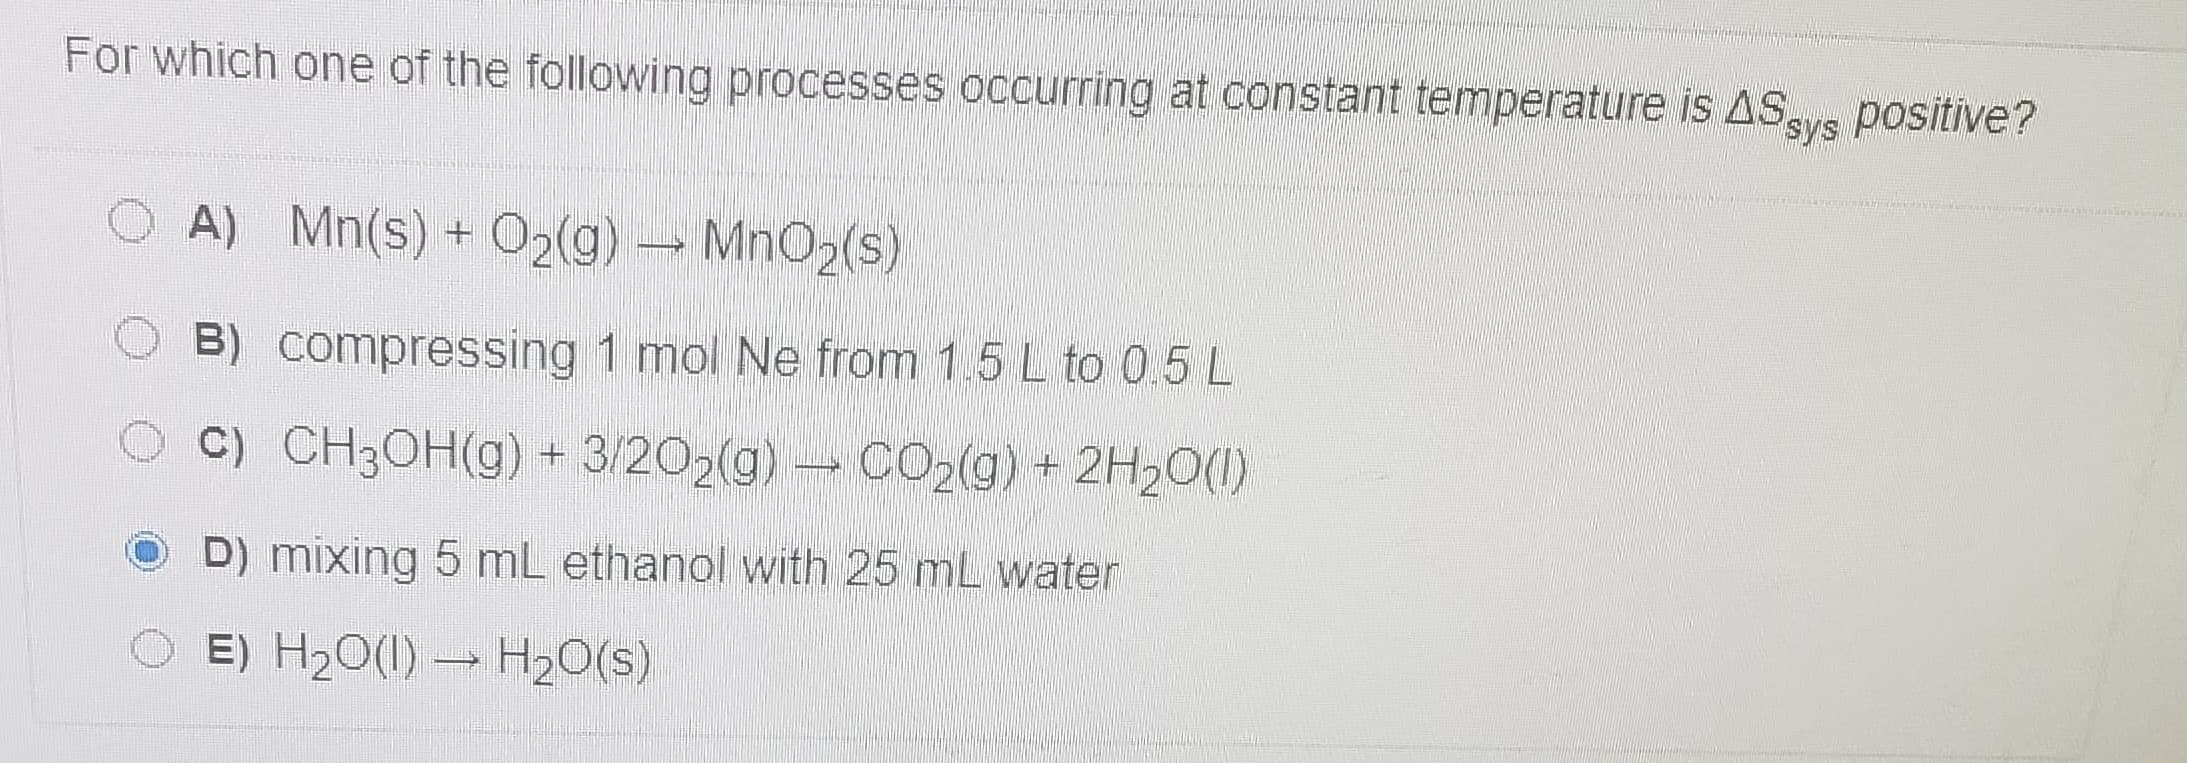 For which one of the following processes occurring at constant temperature is ASsys
positive?
A) Mn(s) + O2(g) MnO2(s)
B) compressing 1 mol Ne from 1.5 L to 0.5L
C) CH3OH(g) + 3/202(g) CO2(g) + 2H20(1)
D) mixing 5 mL ethanol with 25 mL water
E) H20(1) H20(s)
